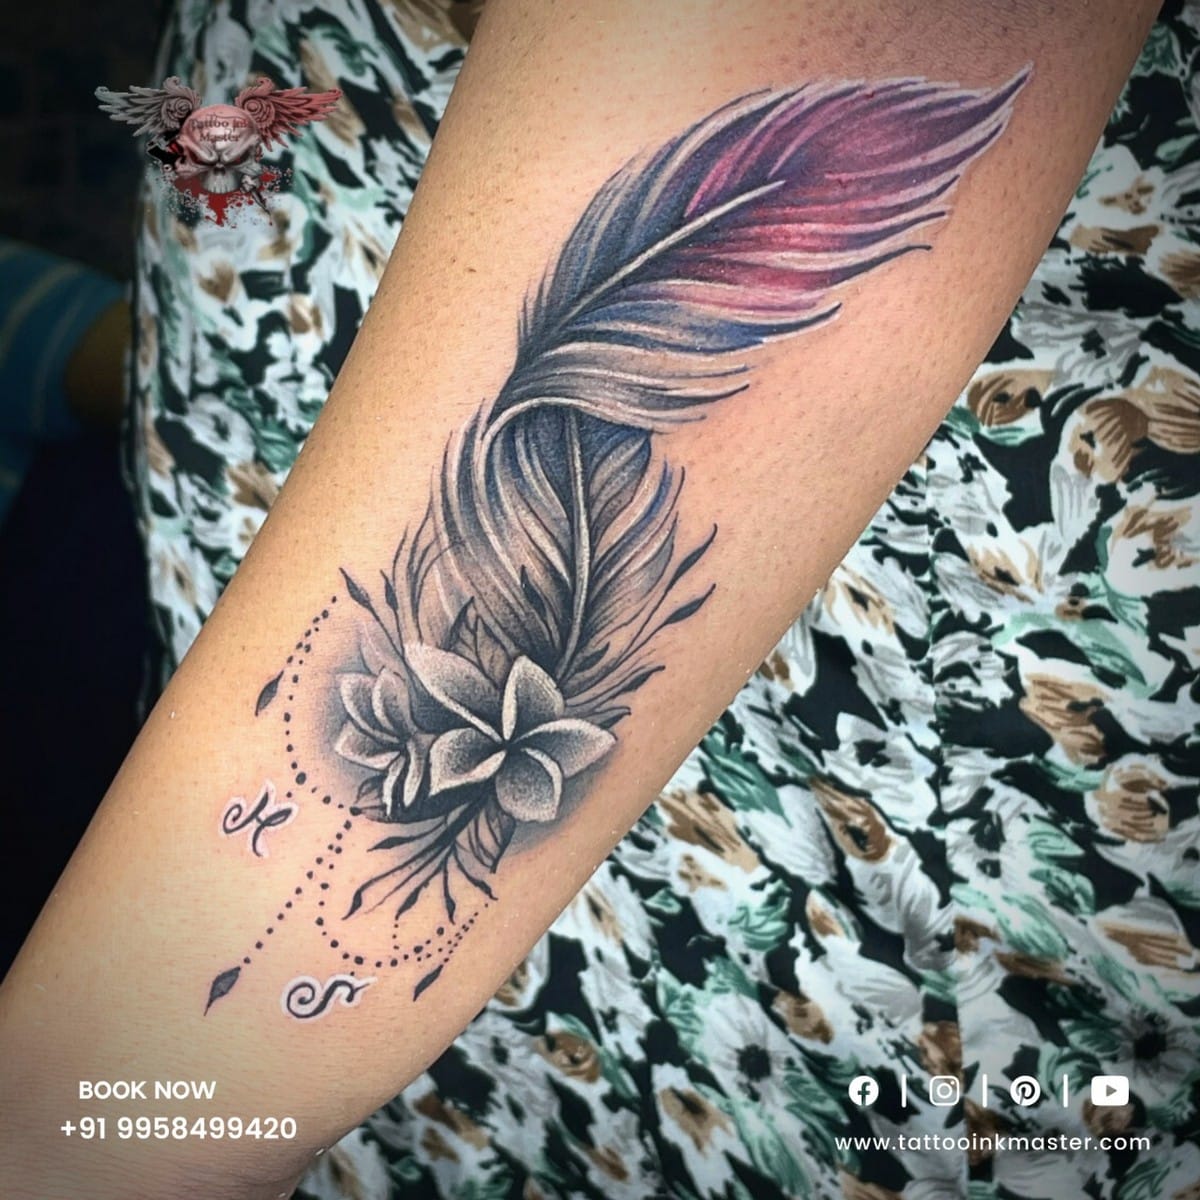 Beautiful looking Colourful Weather Tattoo | Tattoo Ink Master